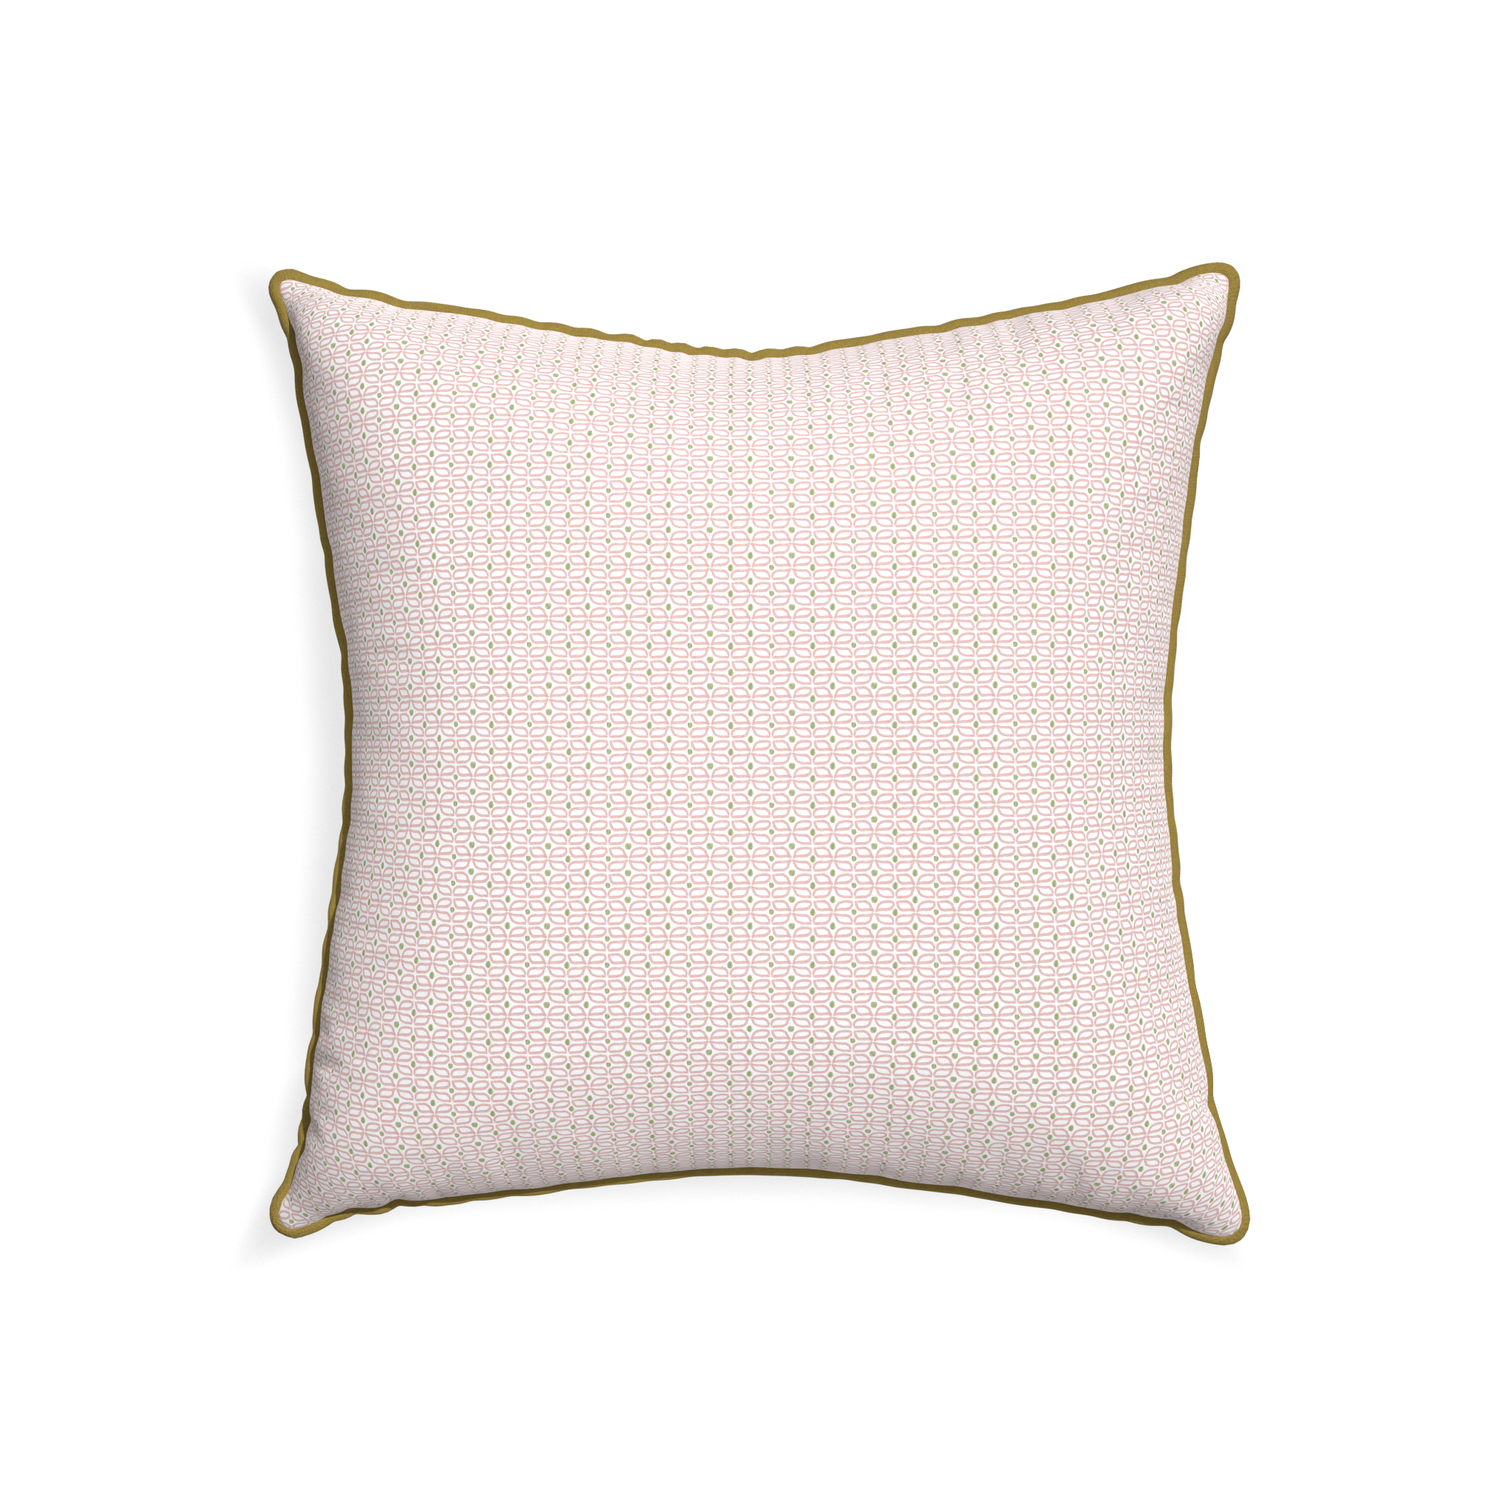 22-square loomi pink custom pink geometricpillow with c piping on white background